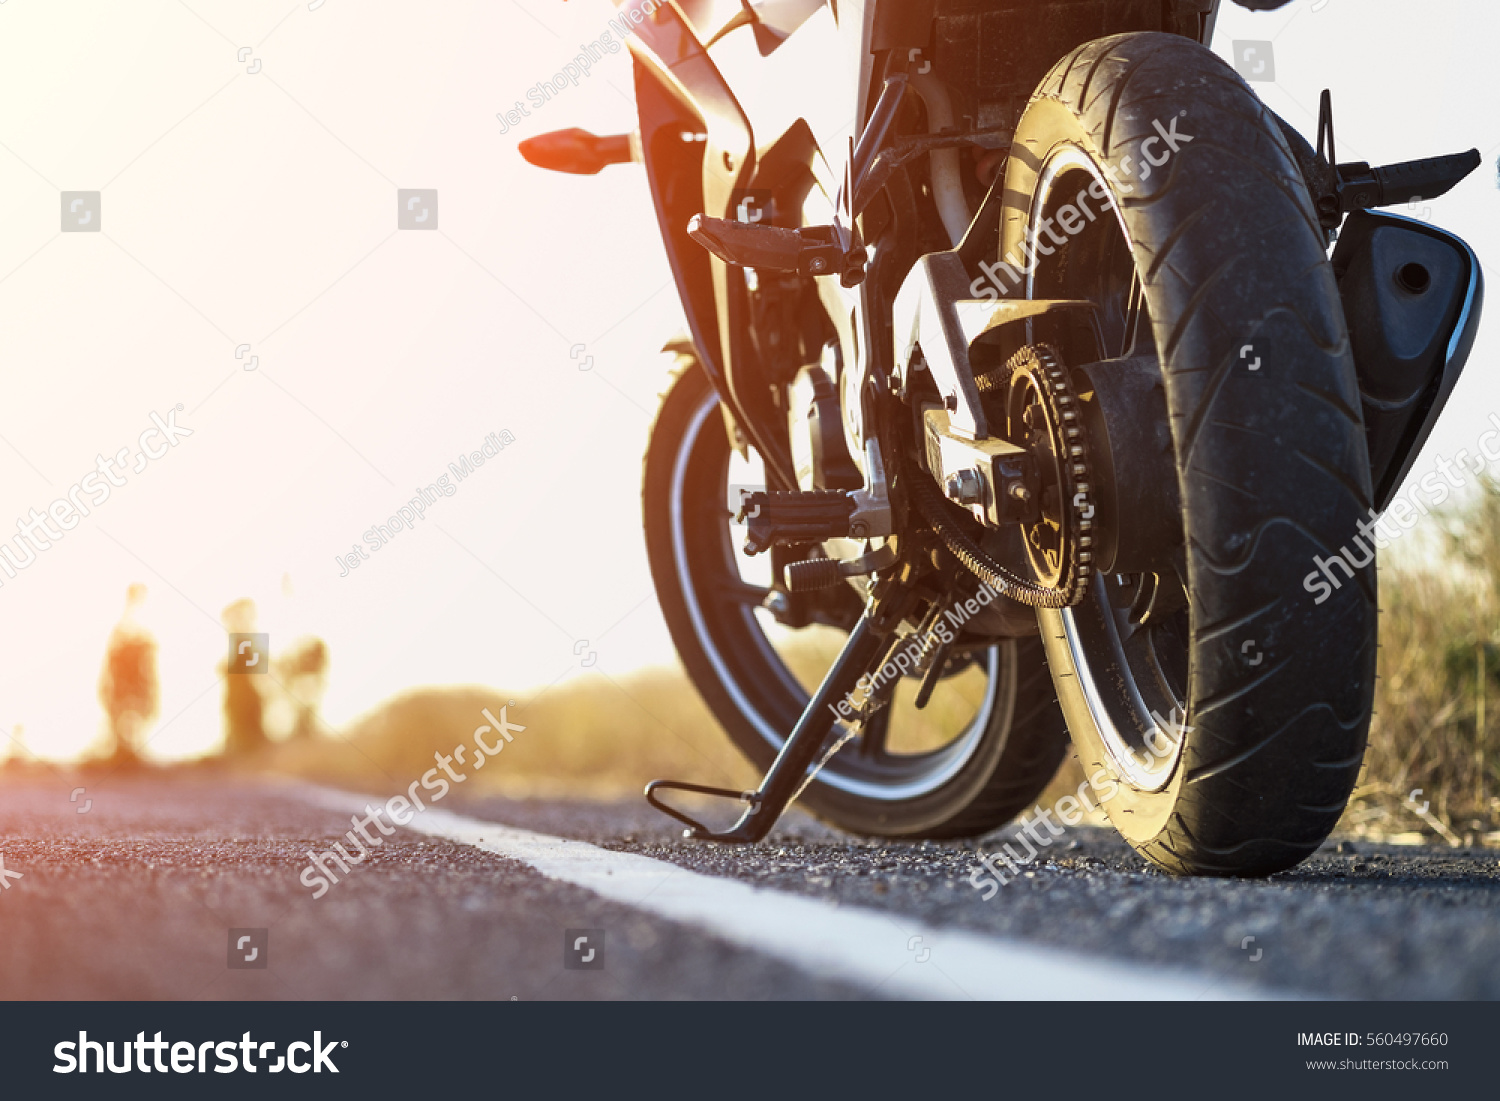 A motorcycle parking on the road right side and sunset, select focusing background. #560497660